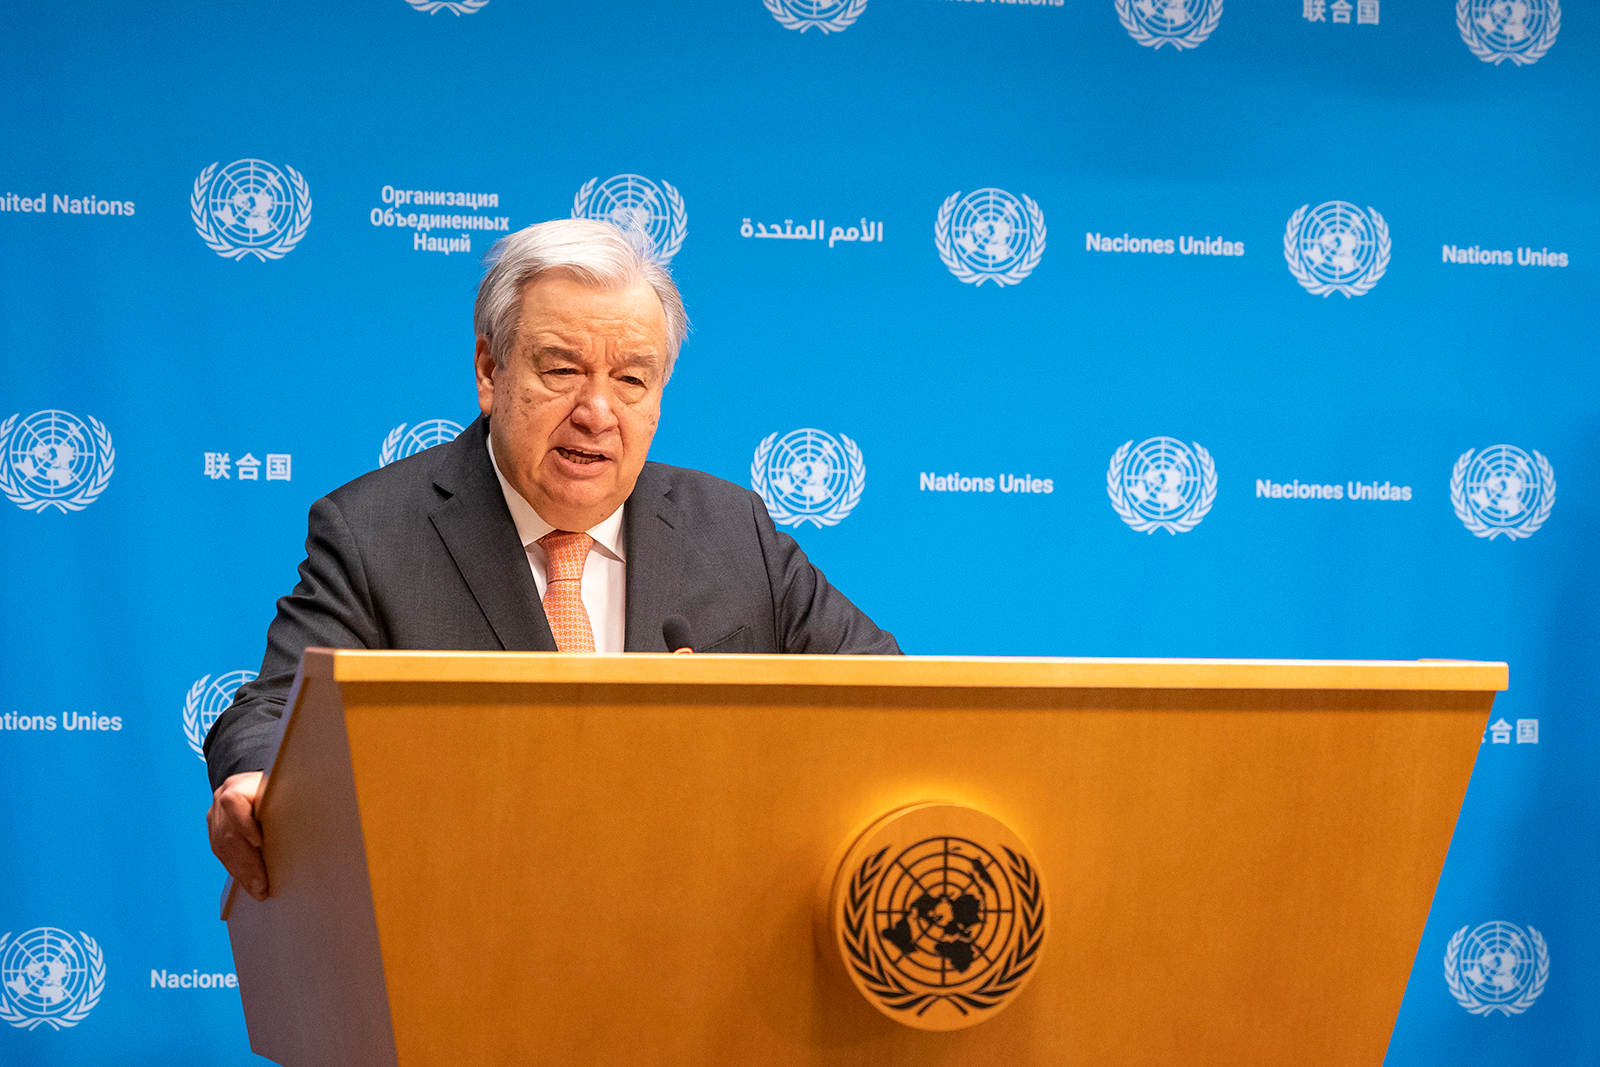 Antonio Guterres attends a press briefing on the situation in the Middle East at the UN headquarters in New York on January 15.